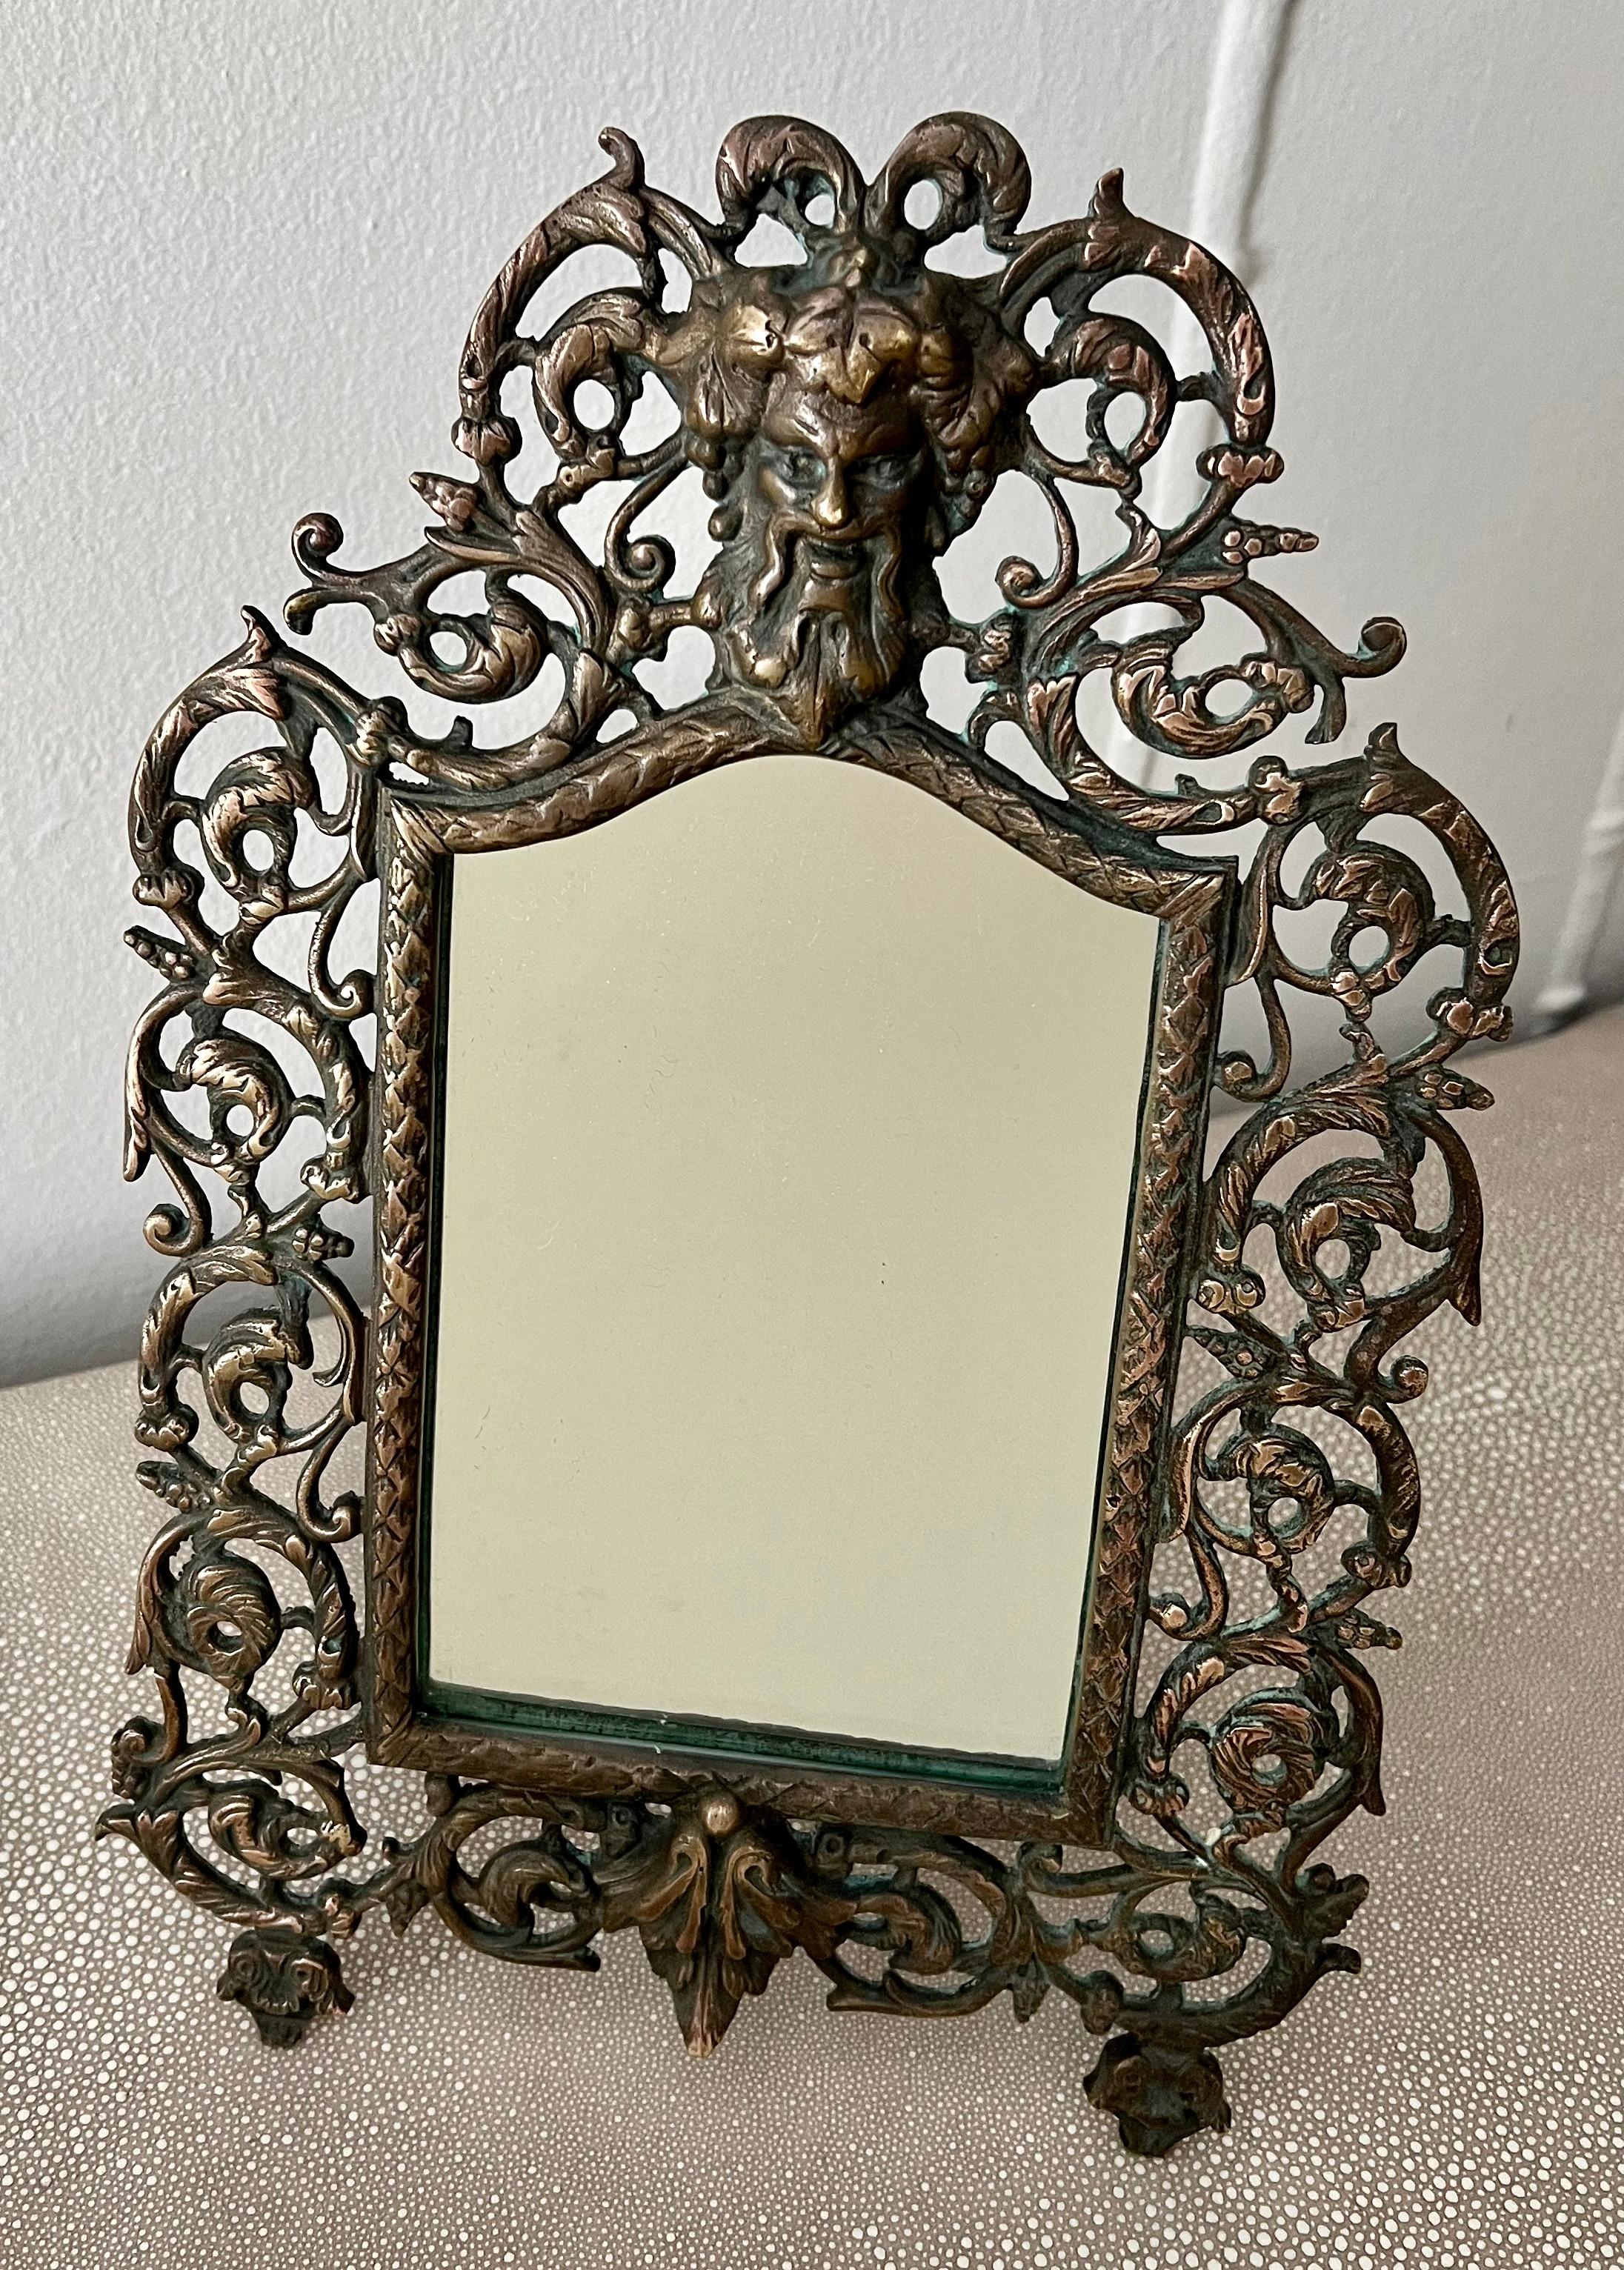 American Empire Brass and Copper P. E. Guerin Framed Mirror with Repousse Satyr For Sale